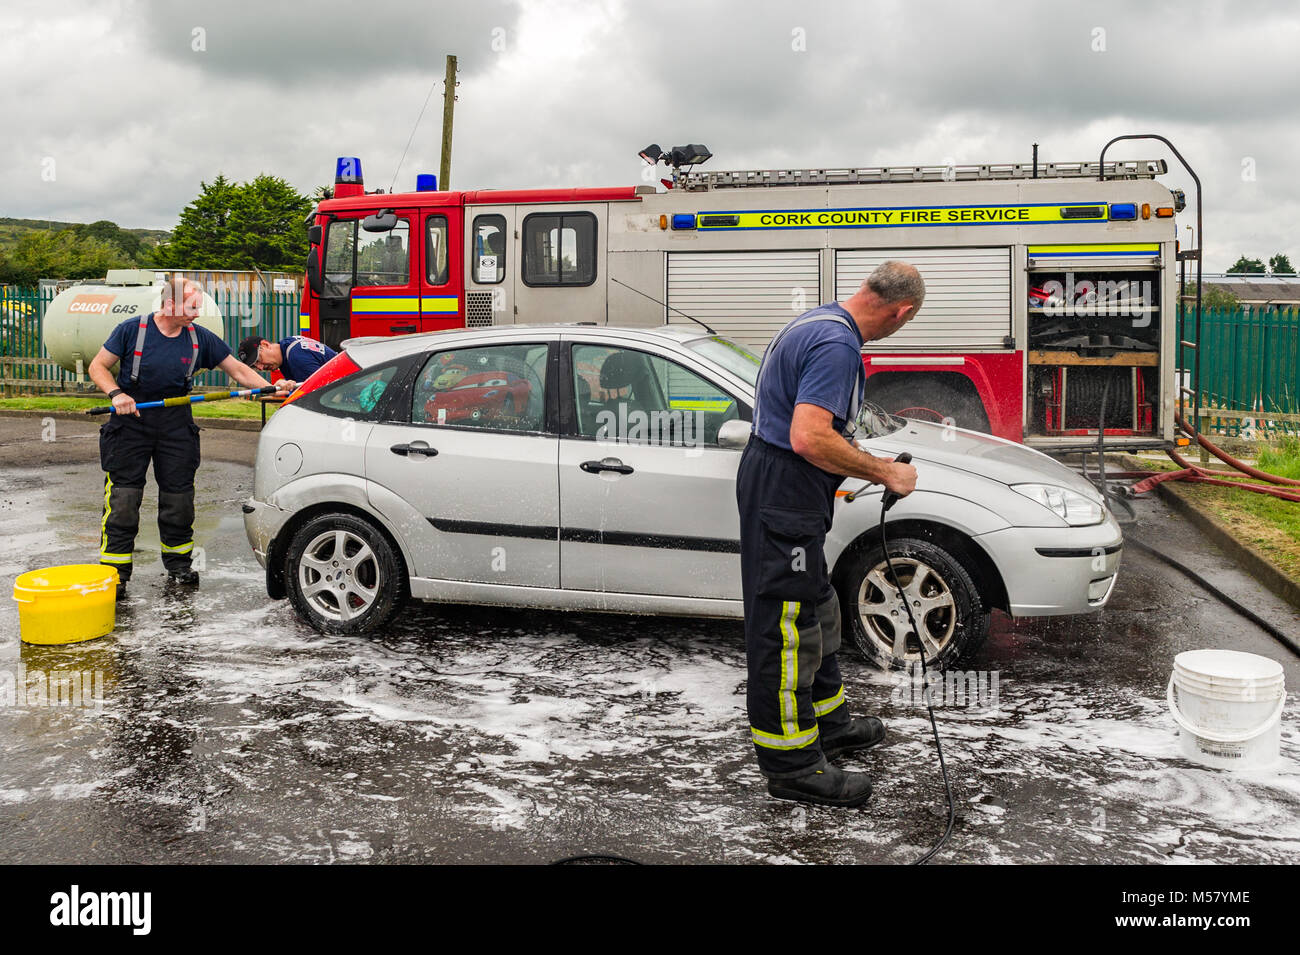 Members of Skibbereen Fire Brigade wash a car as part of a charity car wash in Skibbereen Fire Station, County Cork, Ireland with copy space. Stock Photo